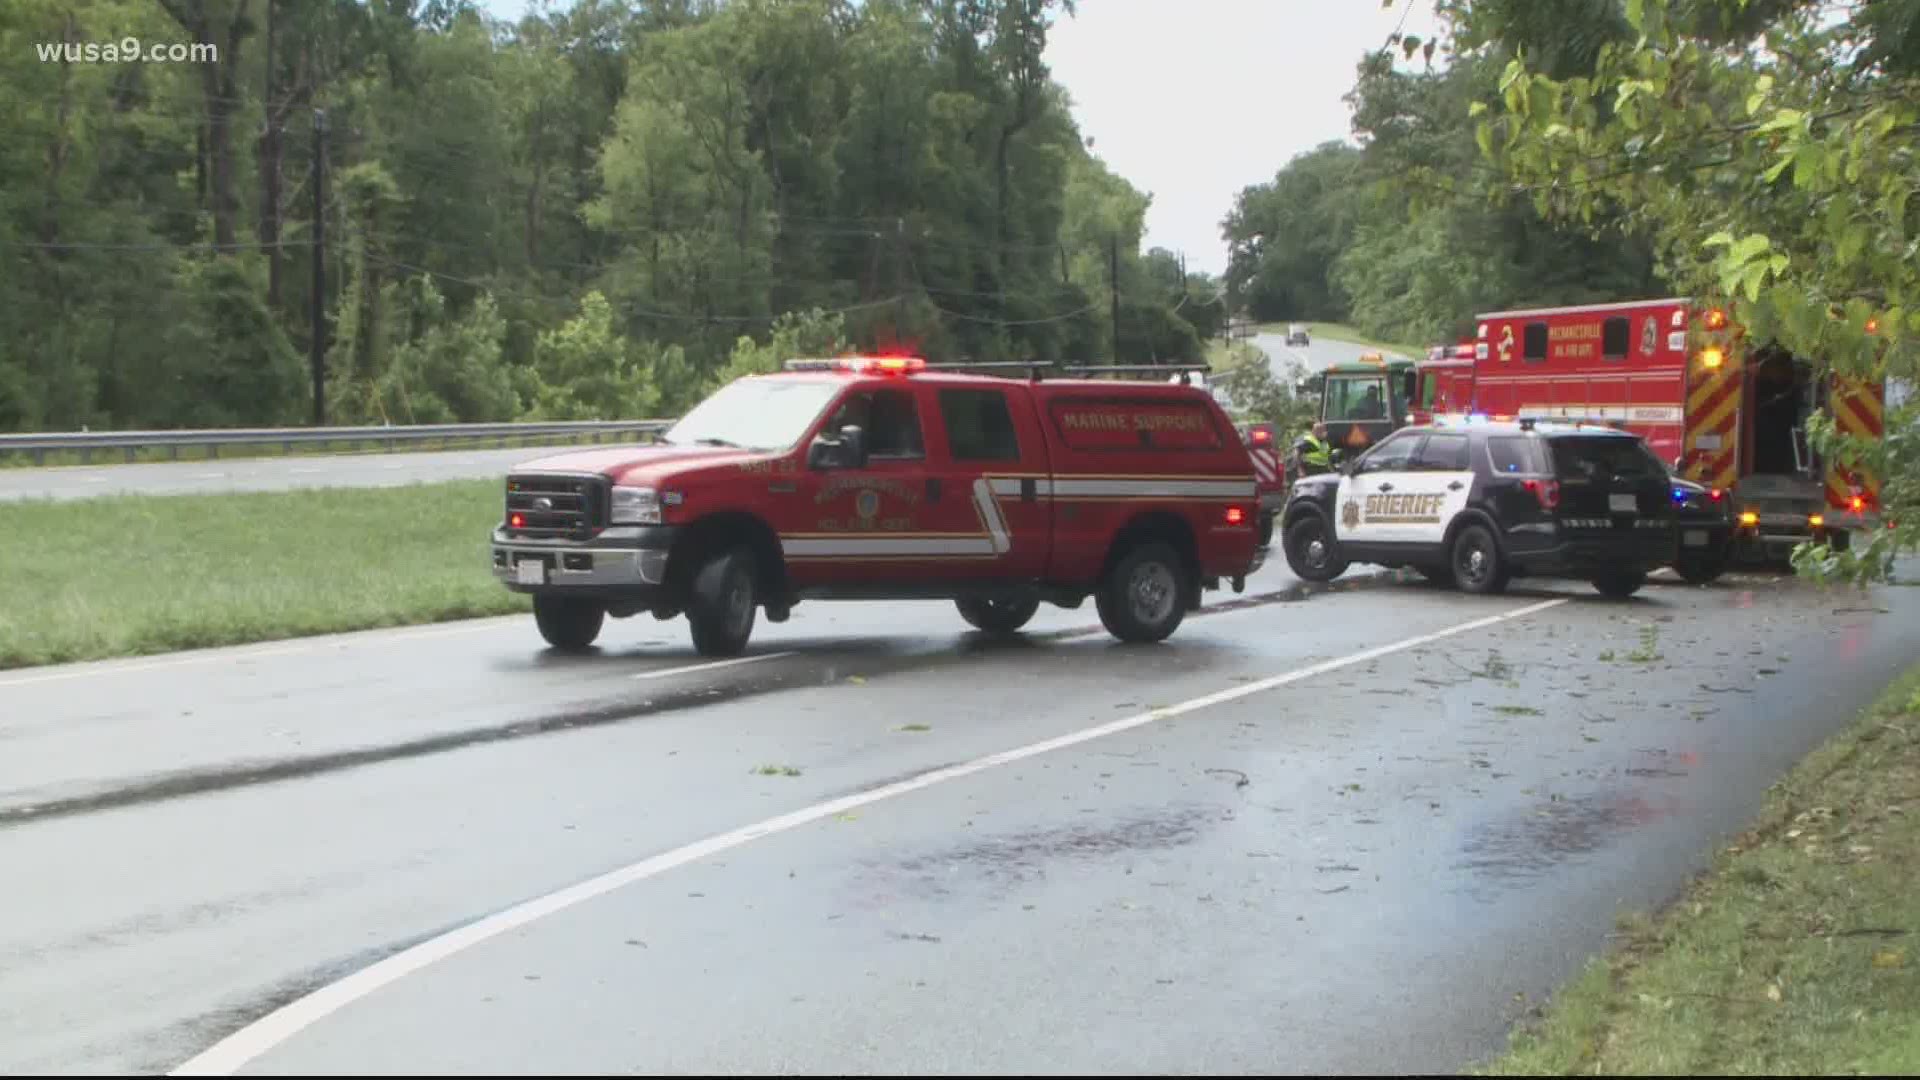 The driver was later reported to have died from injuries. The accident led to road closures near Route 5 for several hours.